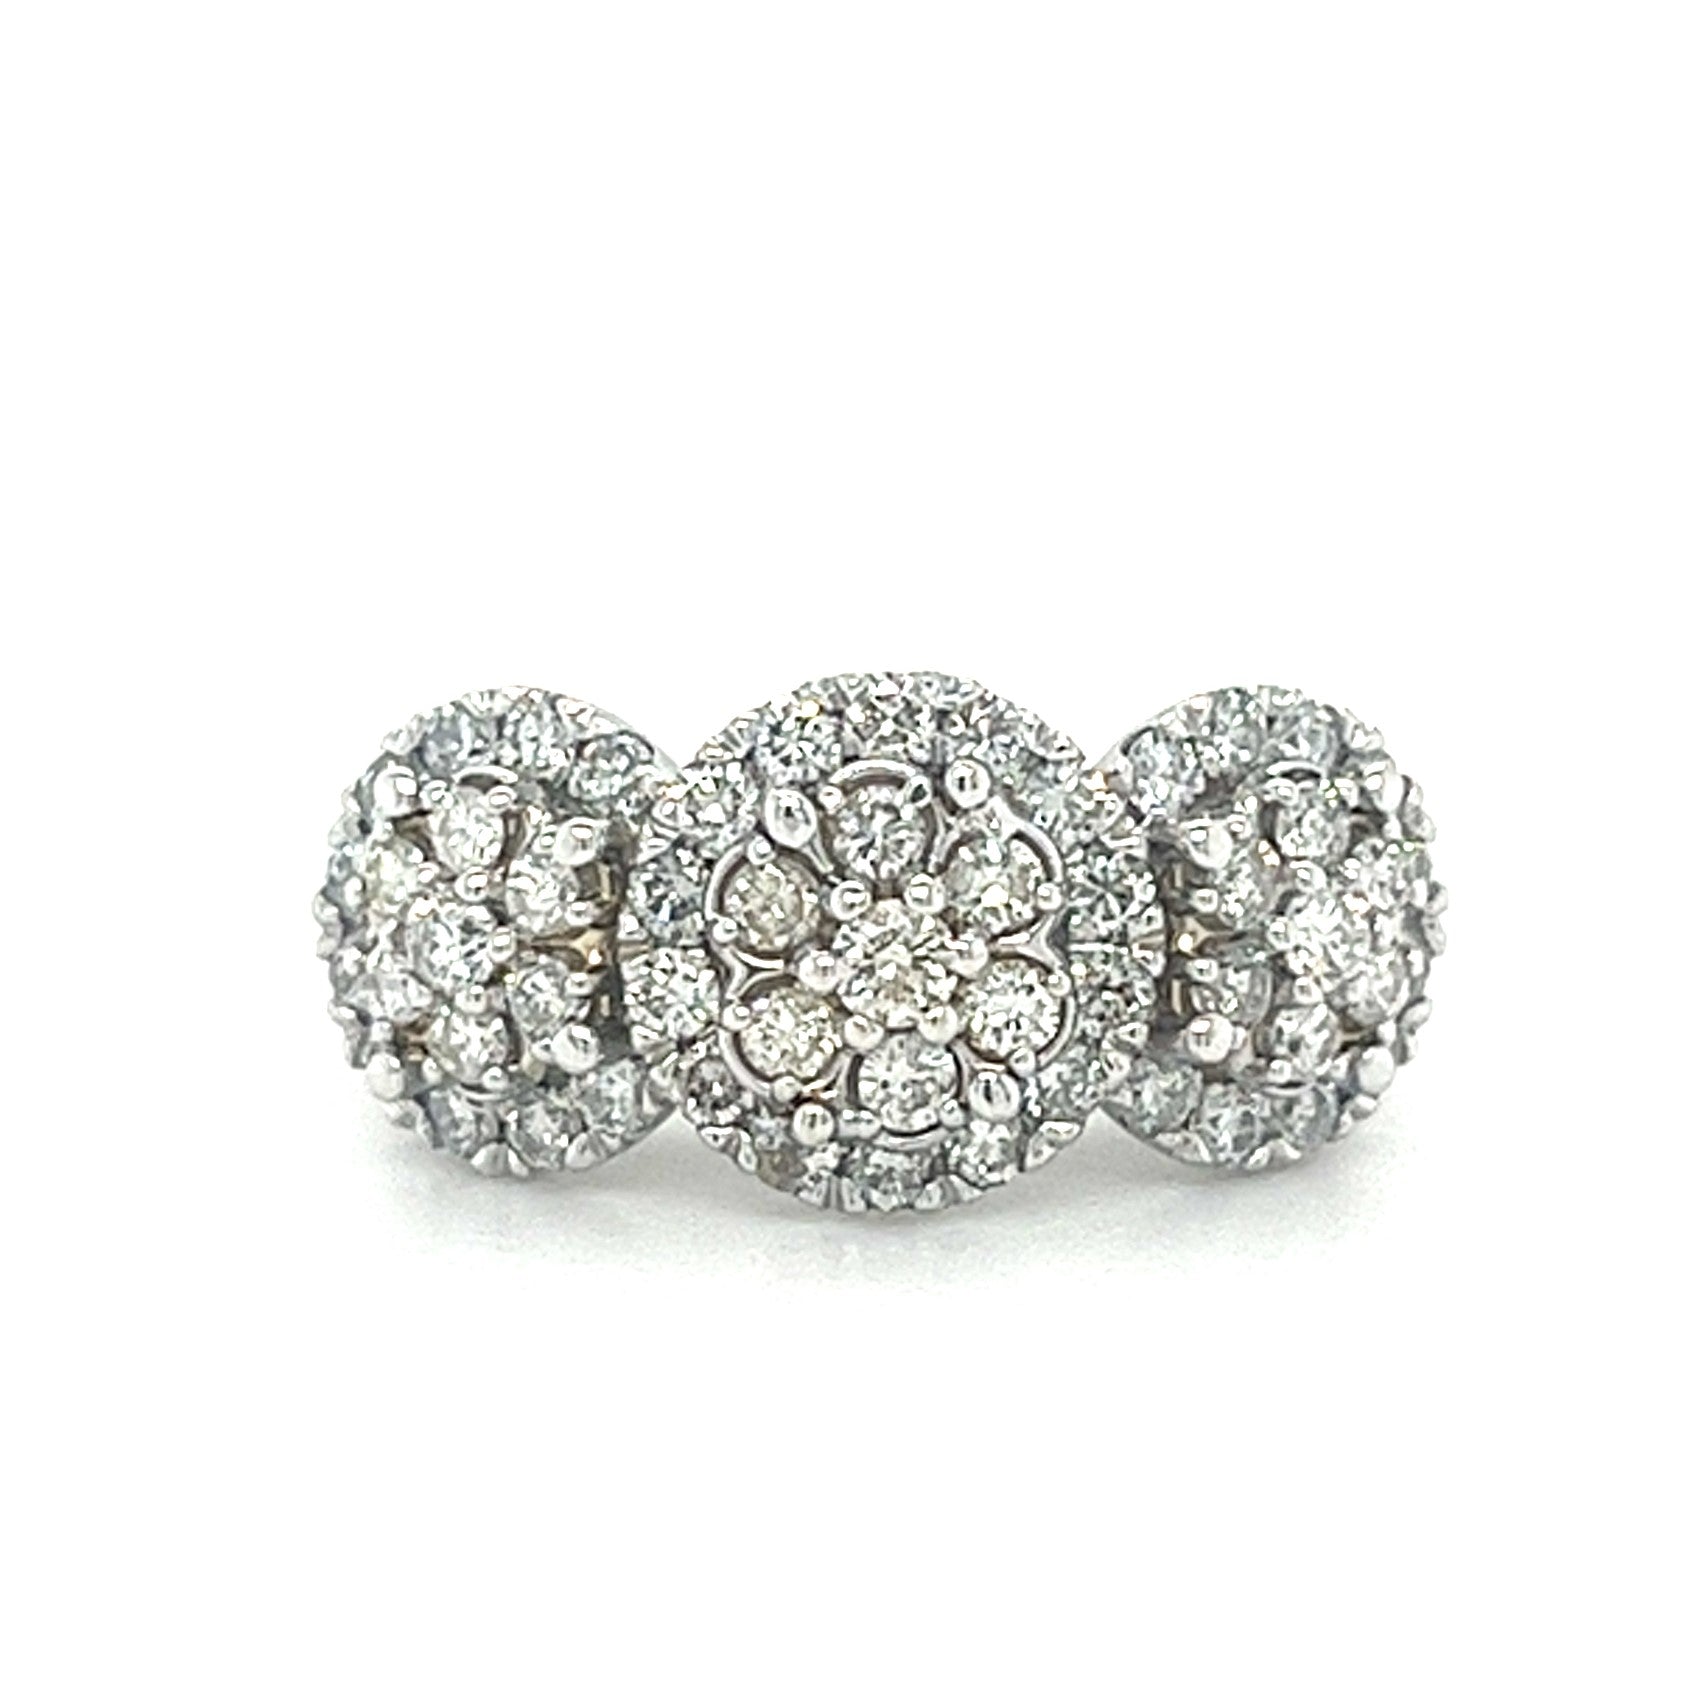 14KT WHITE GOLD FANCY DIAMOND CLUSTER LADIES BAND